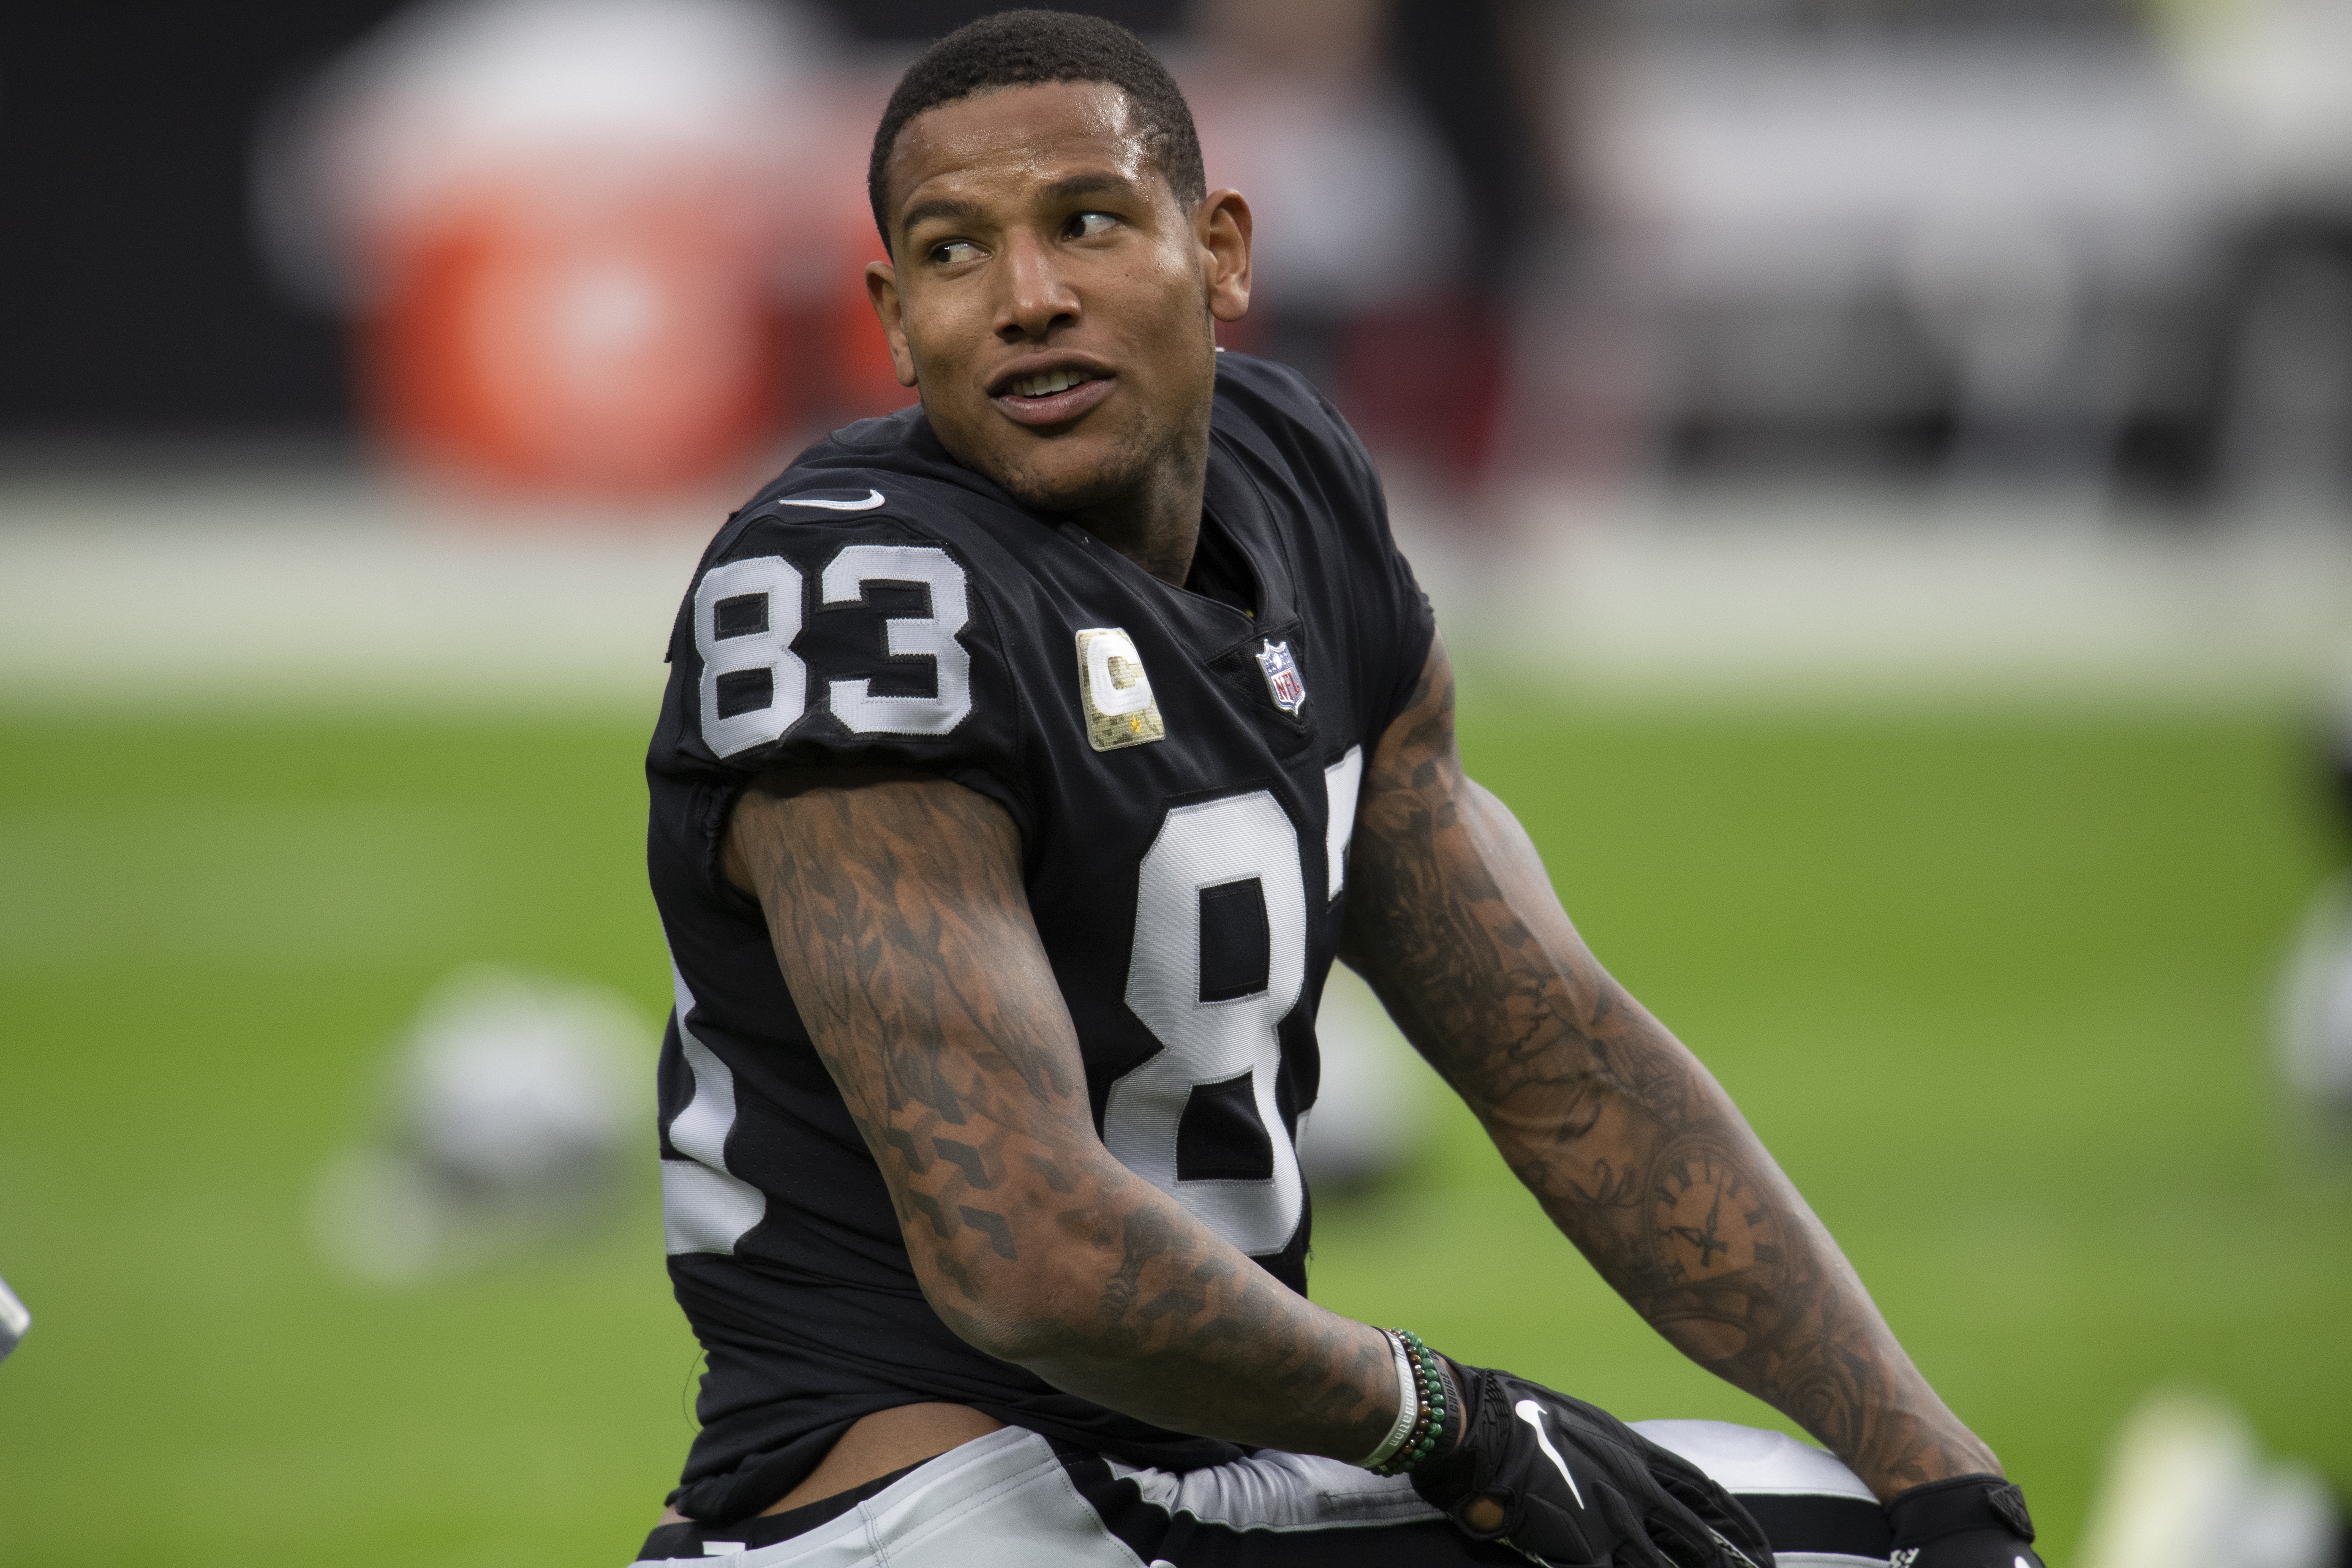 Is Darren Waller playing tonight? (Latest injury update for Cowboys